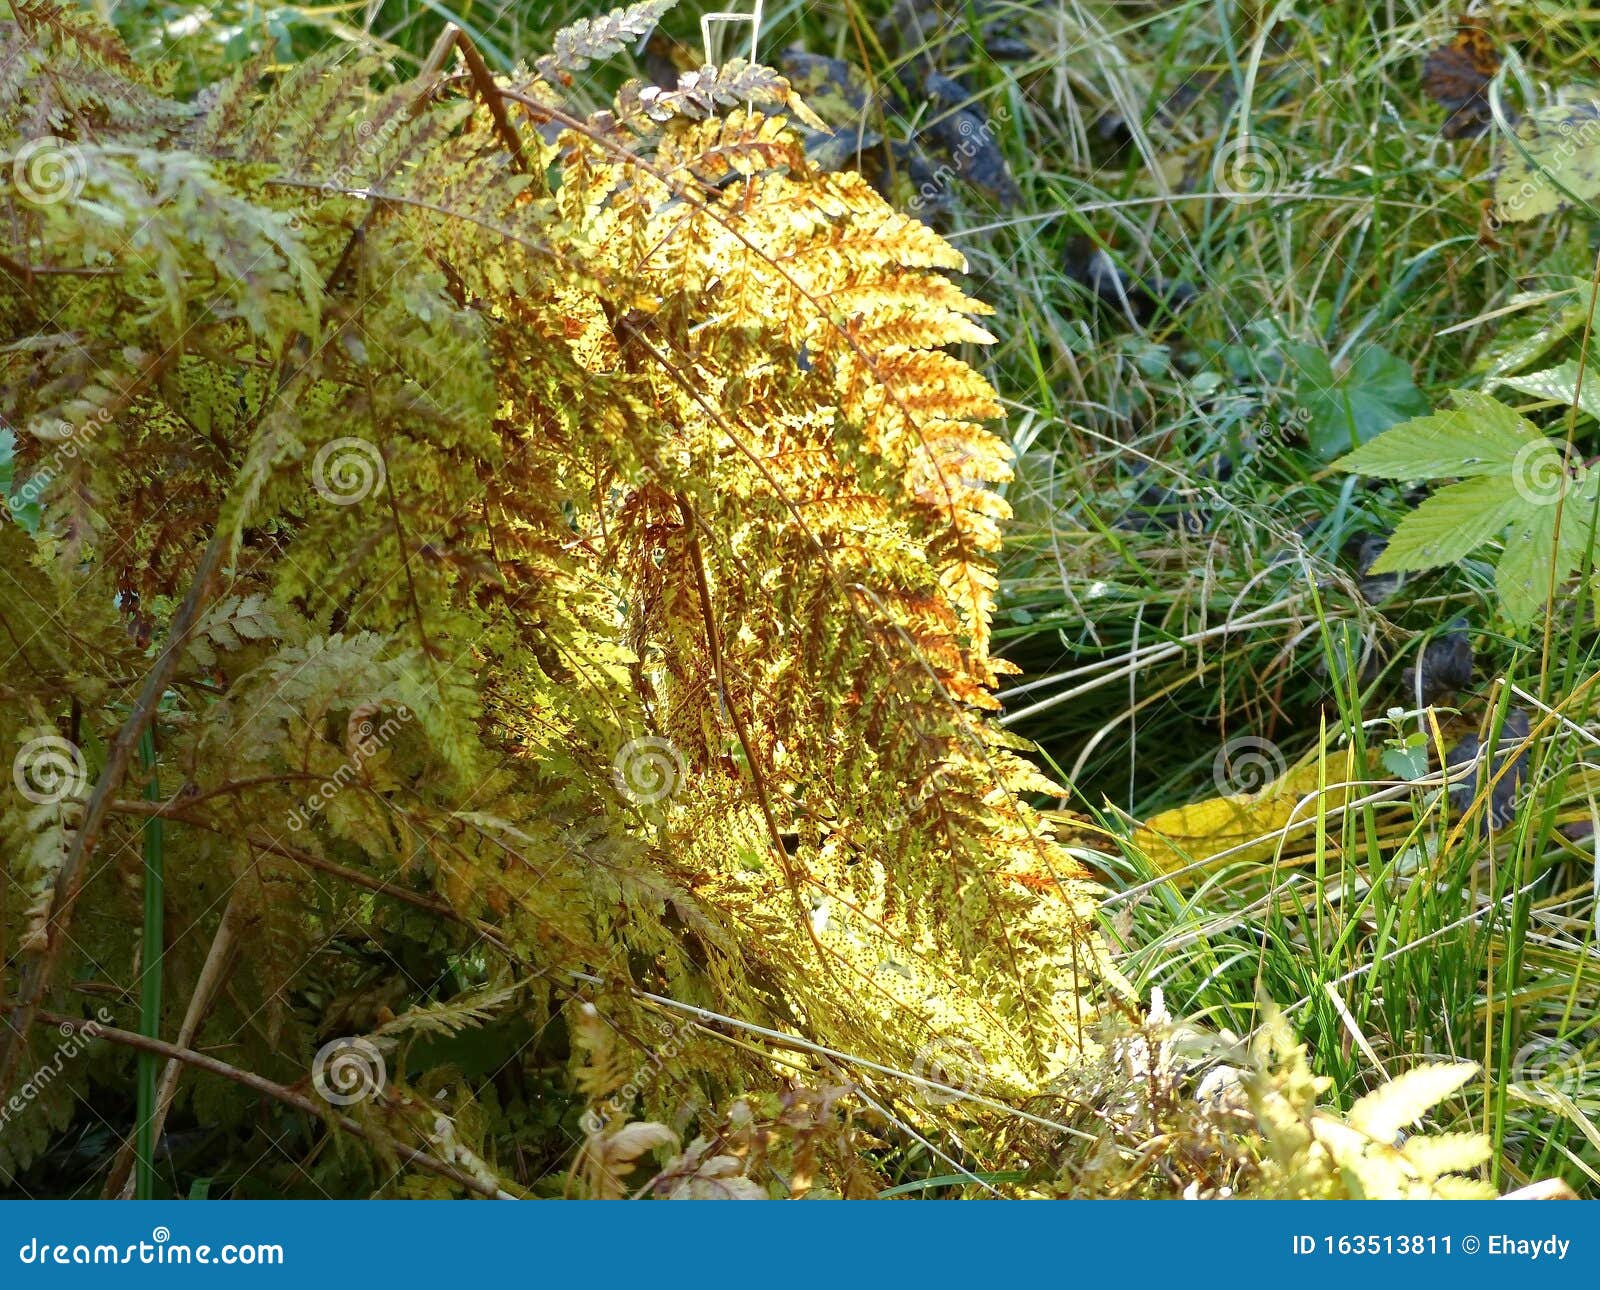 Dryopteris Commonly Called The Wood Ferns Species Of Ferns Distributed In Asia The Americas Europe Africa Stock Image Image Of Commonly Green 163513811